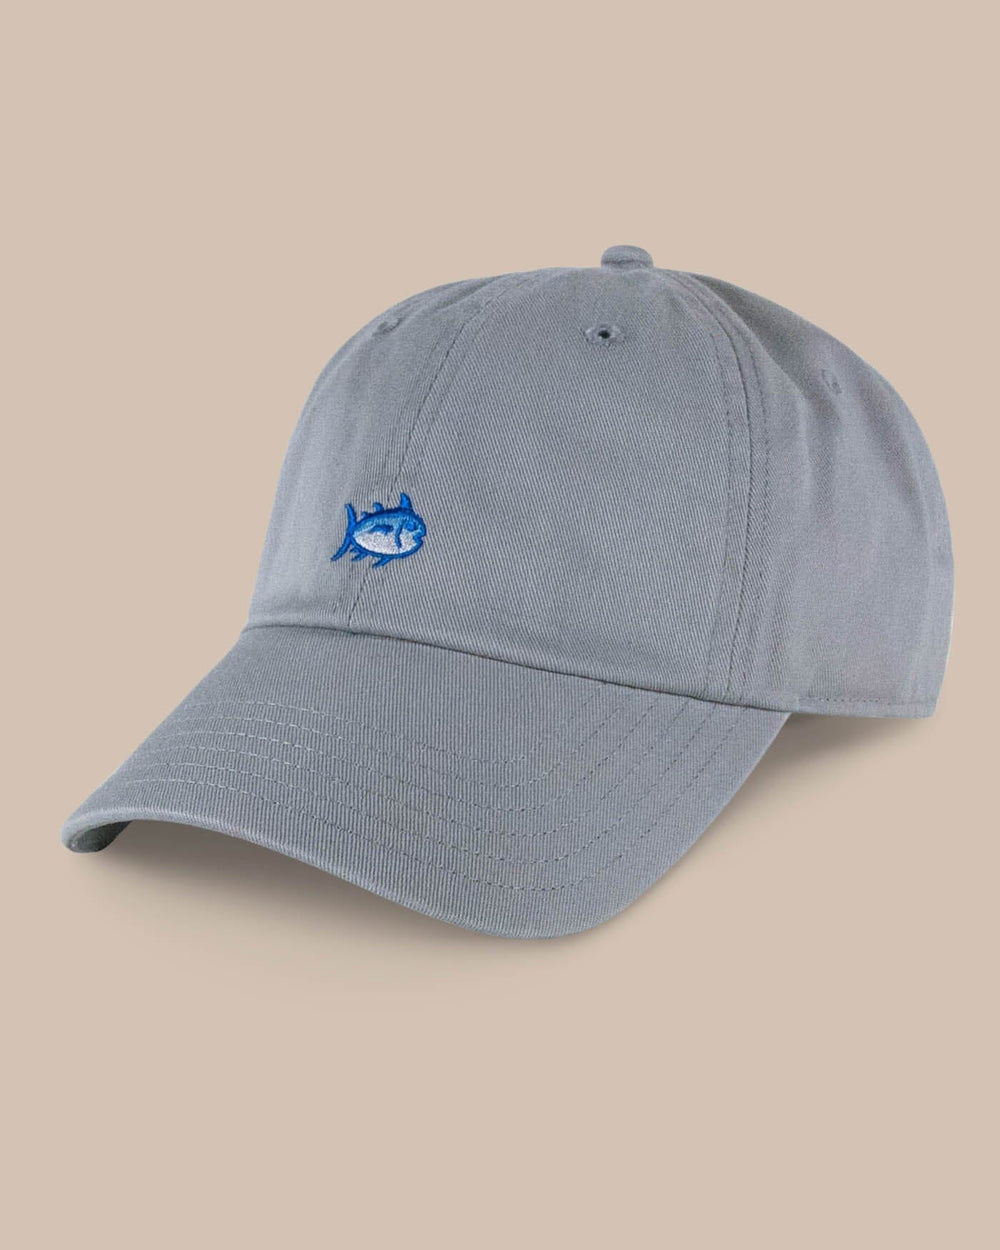 The front view of the Southern Tide Mini Skipjack Leather Strap Hat by Southern Tide - Light Grey